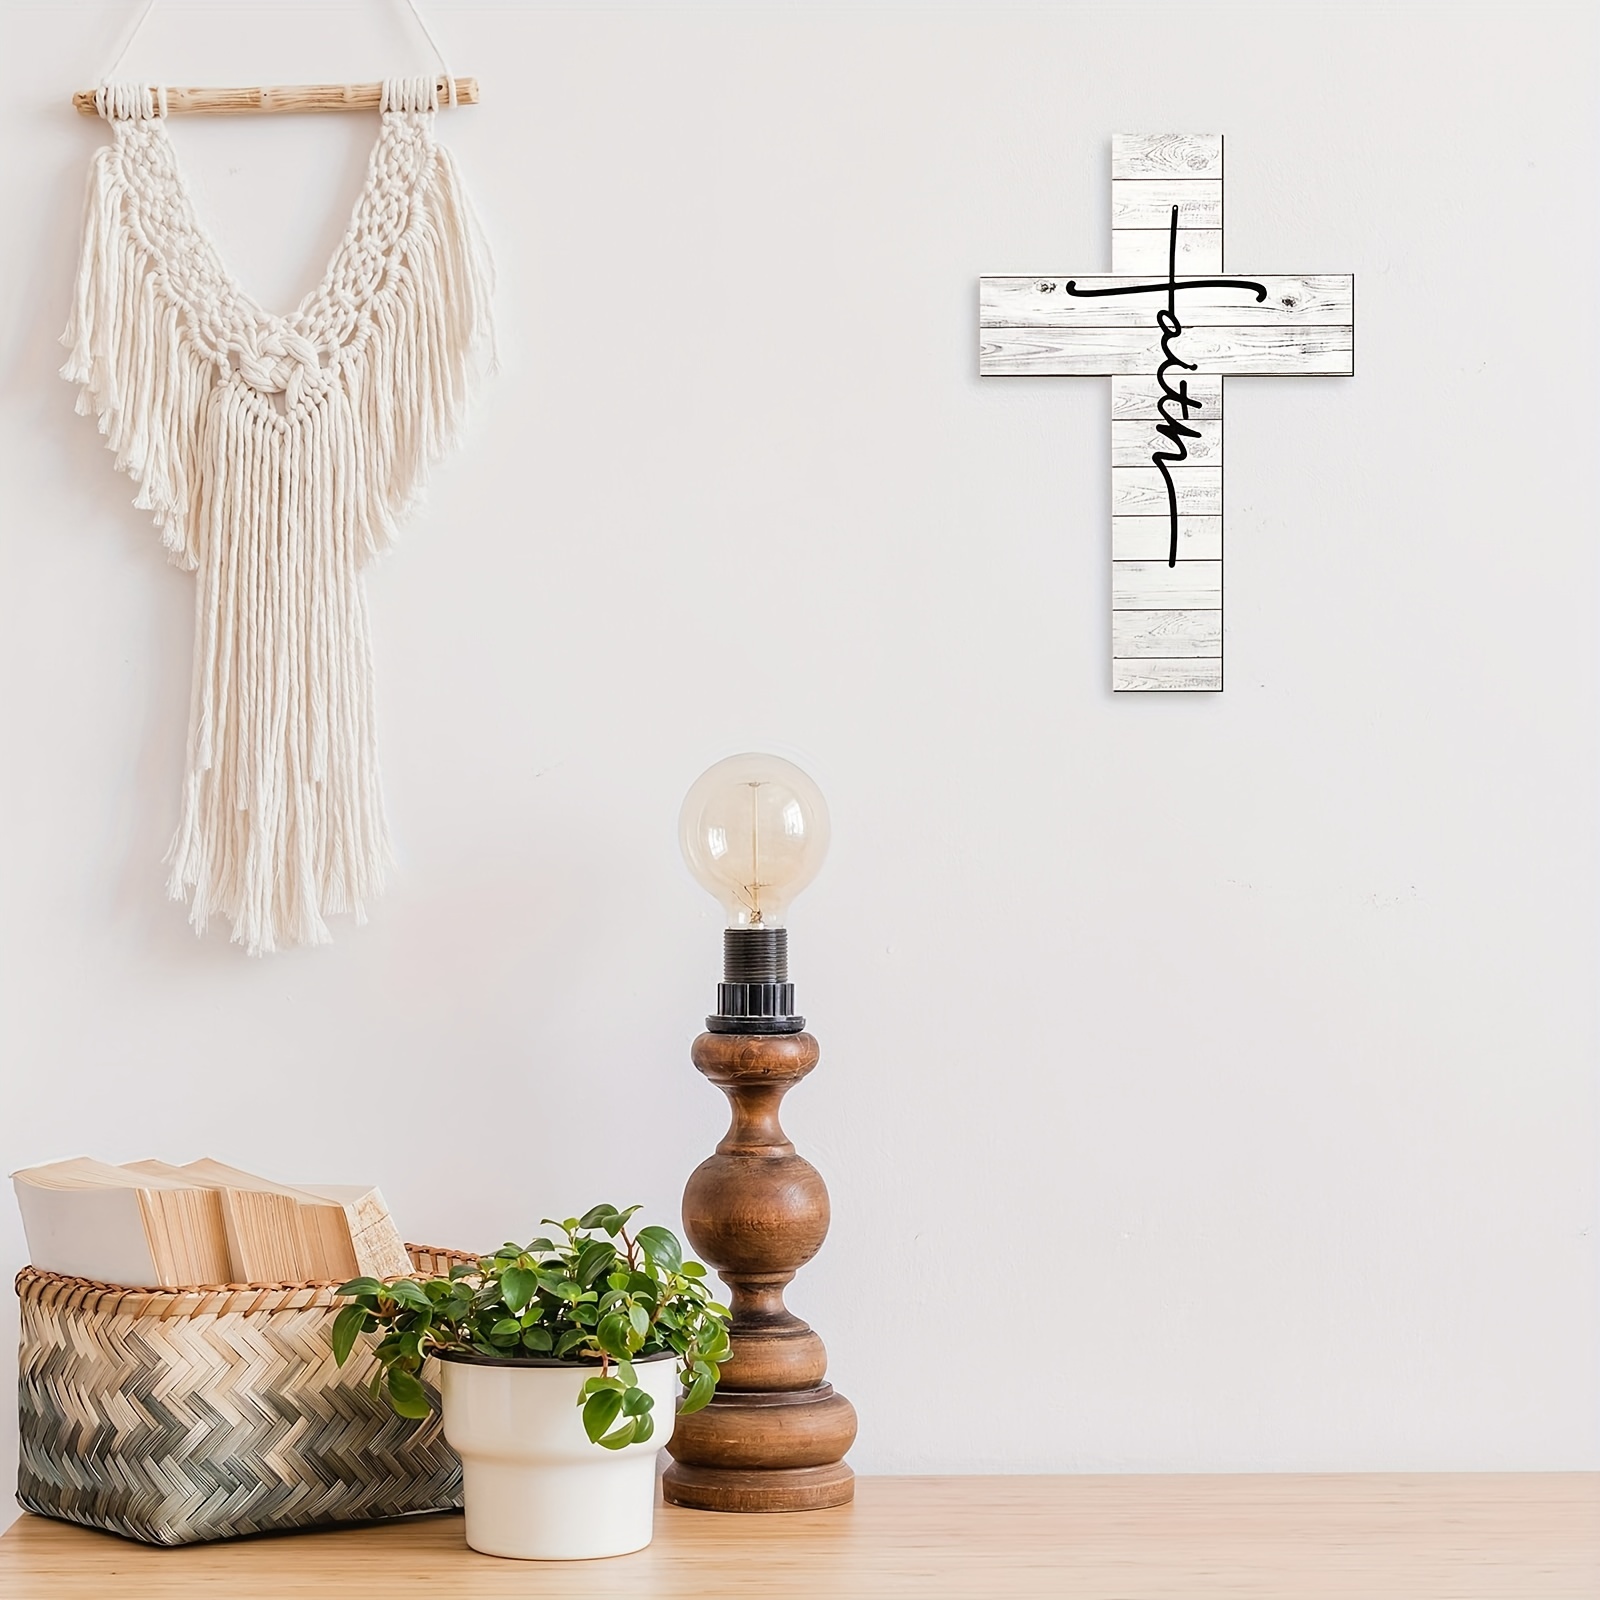 Wall Crosses for Home Cross for Wall Decor Wooden Cross Wall Decor Wood  Cross Wall Decor Christian Home Decorative Cross Christian Wall Art 